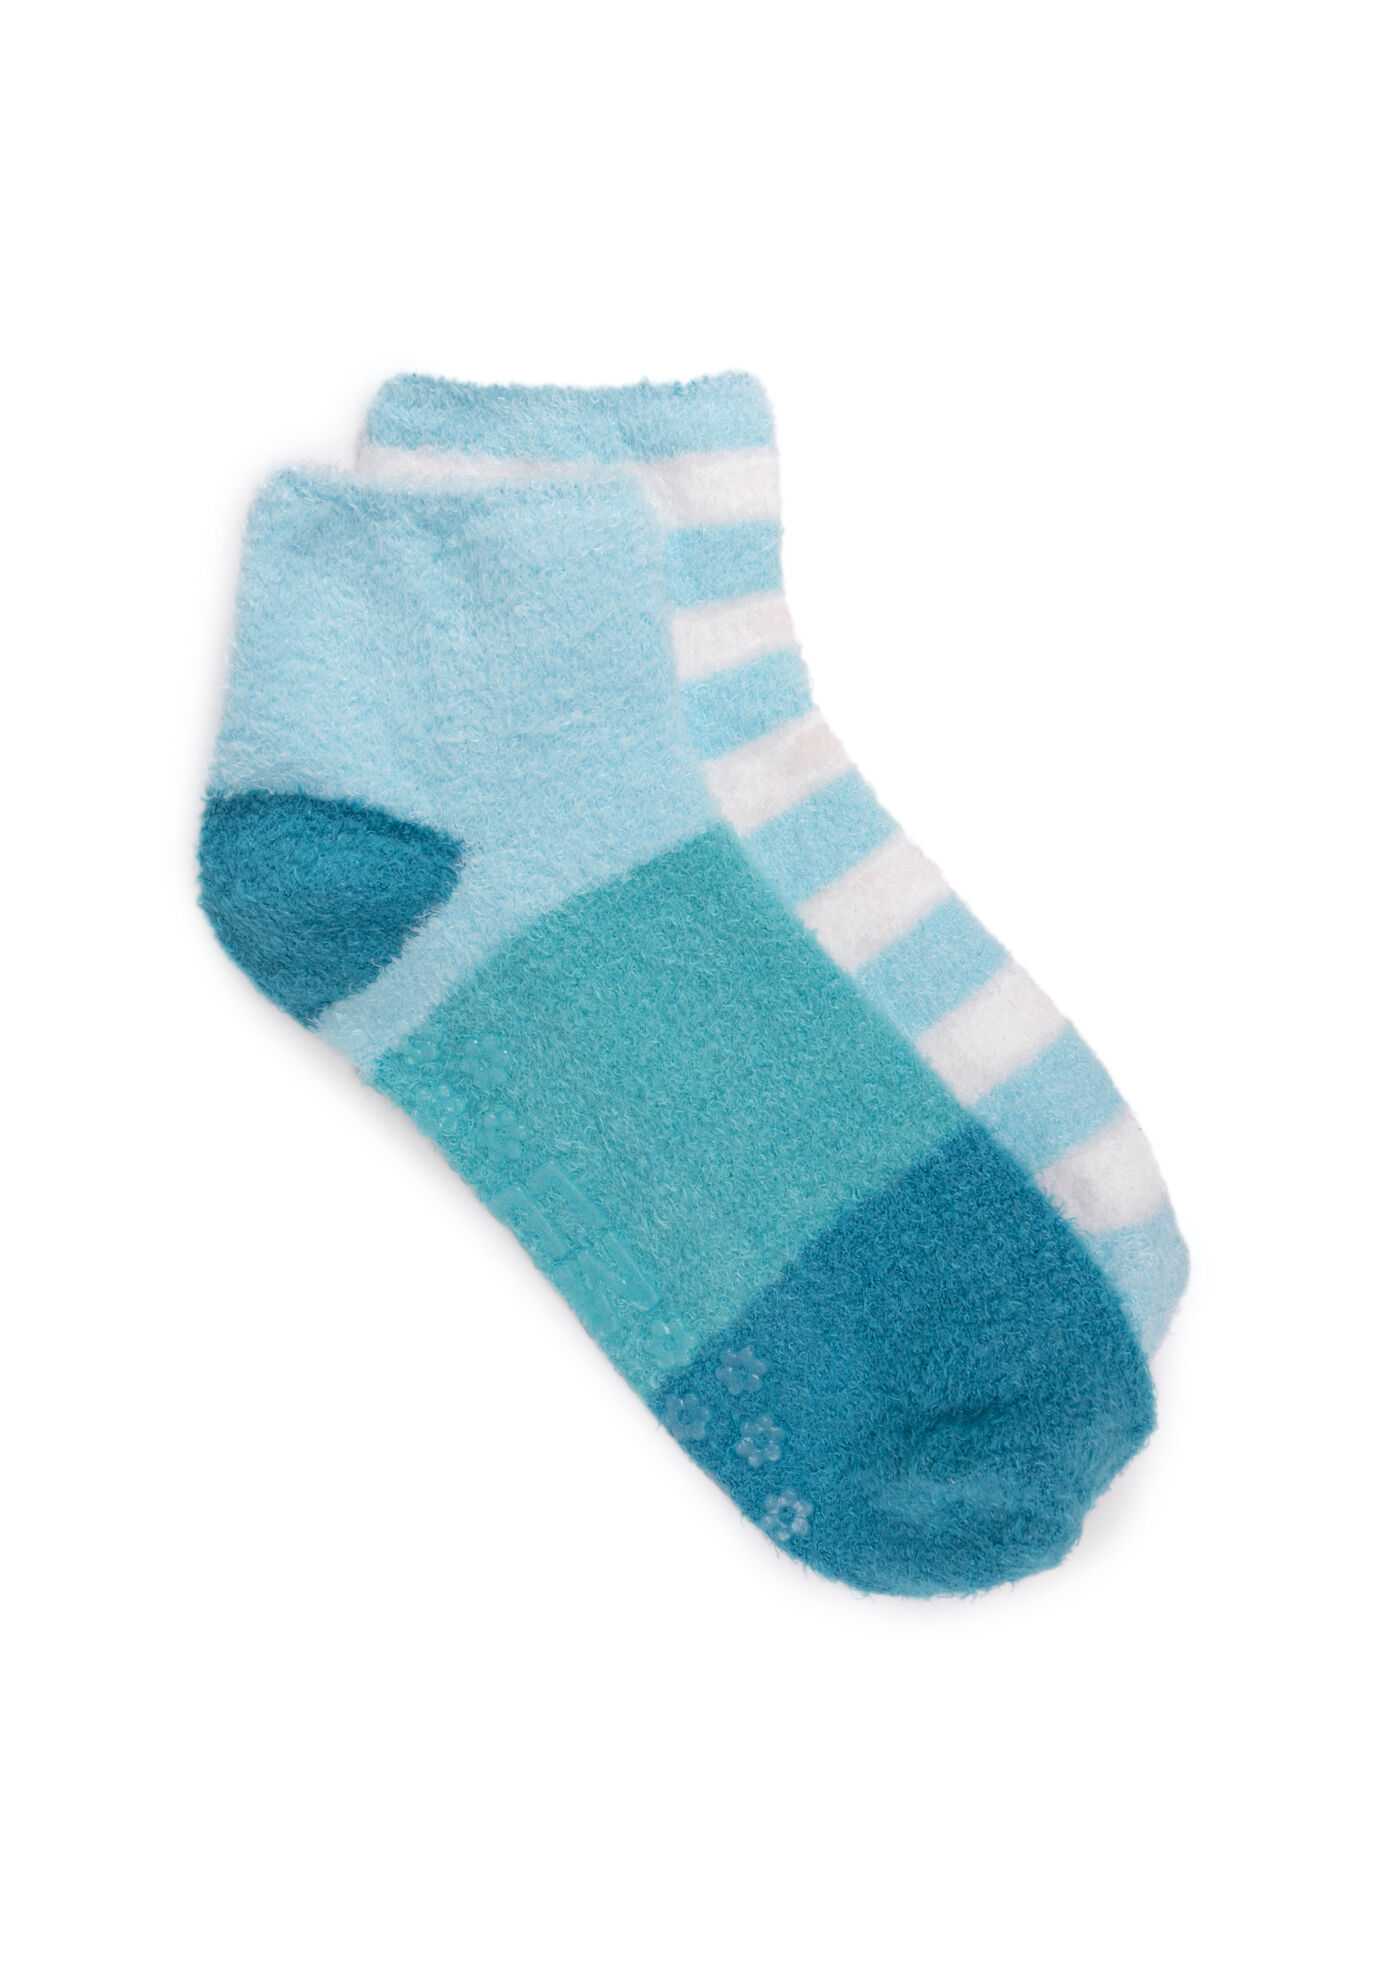 Women's 2 Pair Pack Aloe Infused Crew Socks by MUK LUKS in Turquoise (Size ONE)